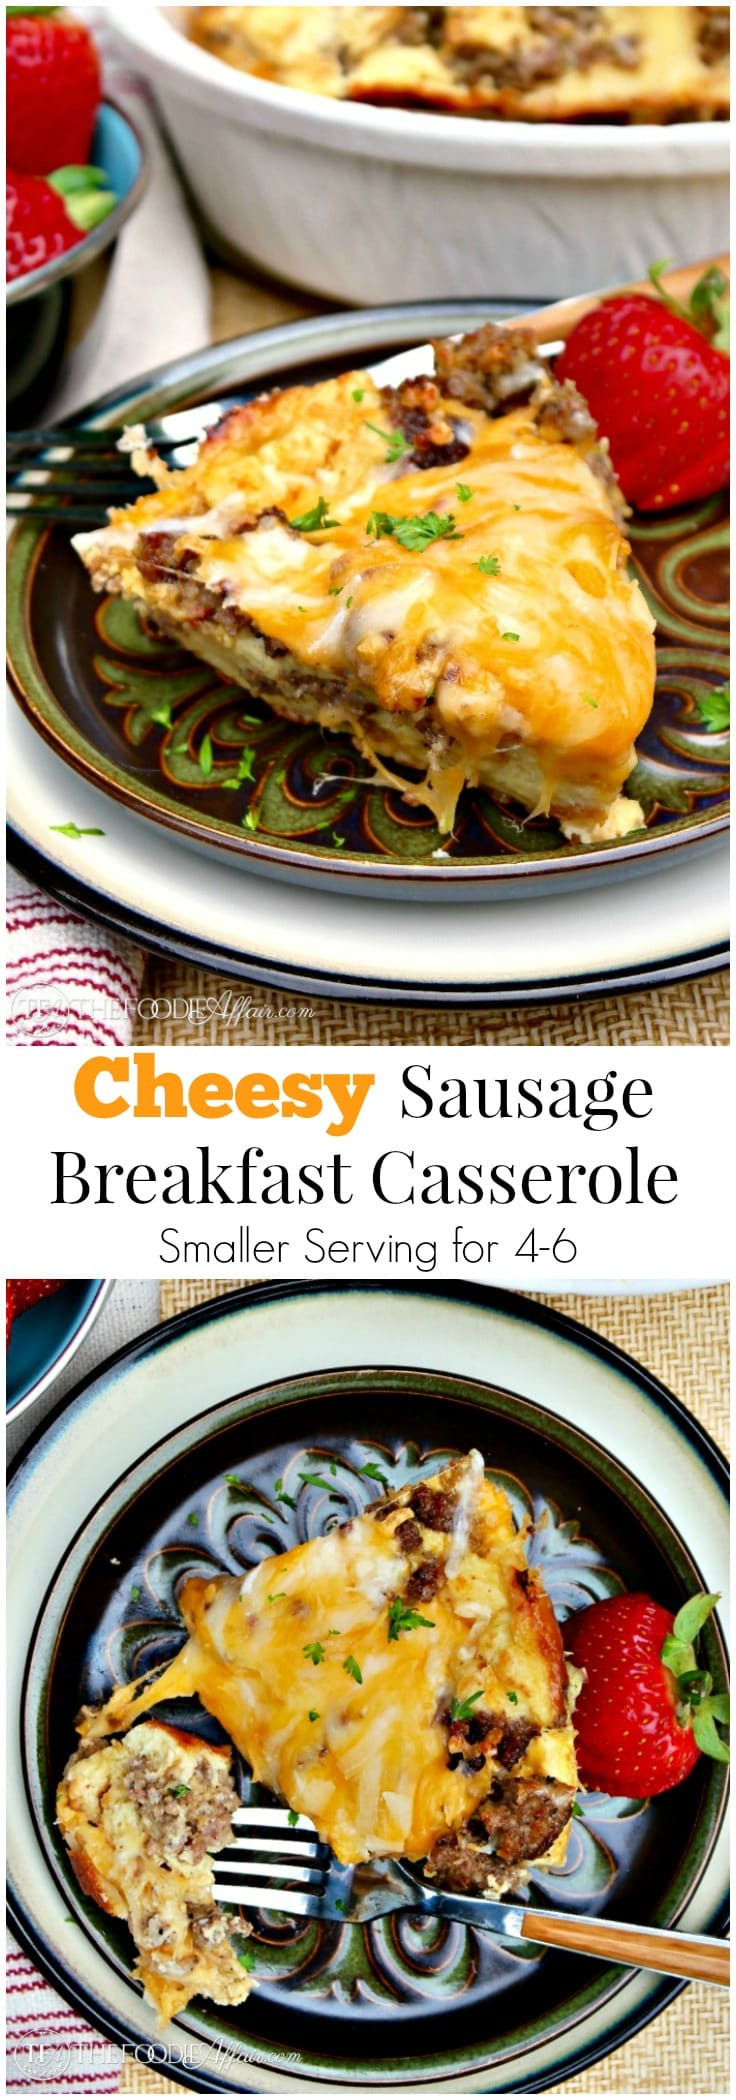 Breakfast Casseroles With Sausage
 Easy Cheesy Sausage Breakfast Casserole